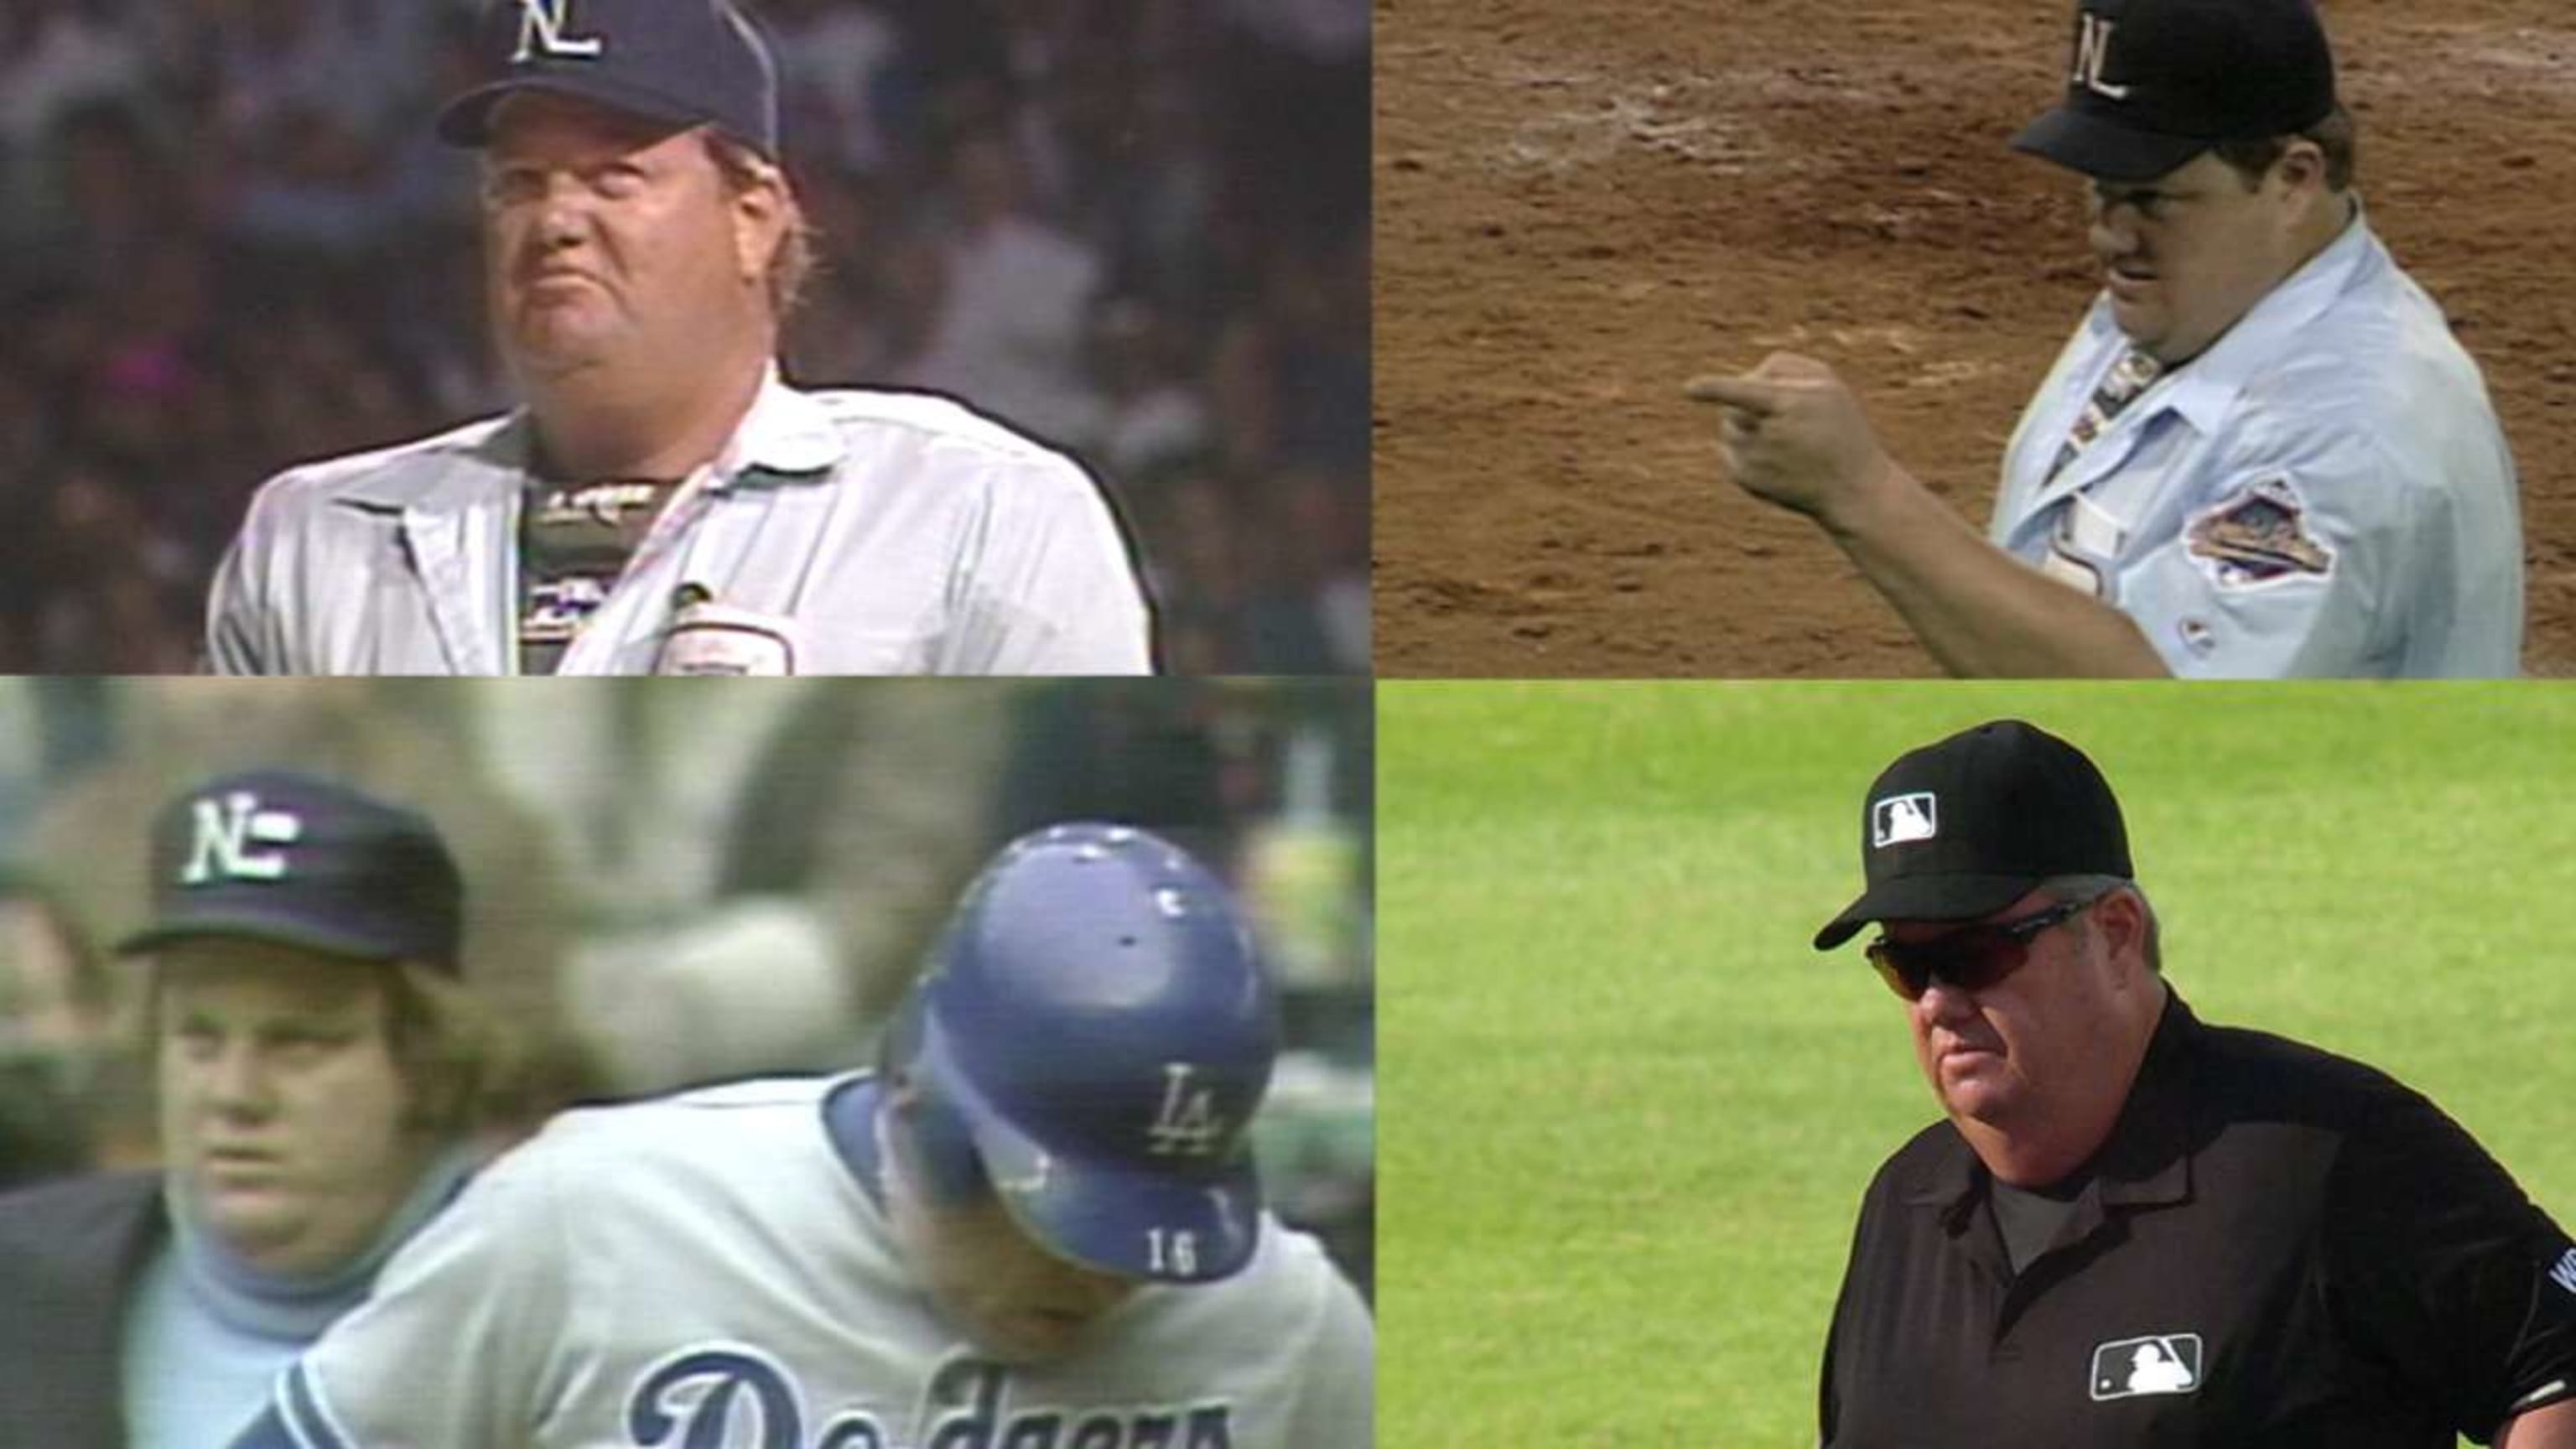 MLB umpire 'Country Joe' West retires after working record 5,460 games 